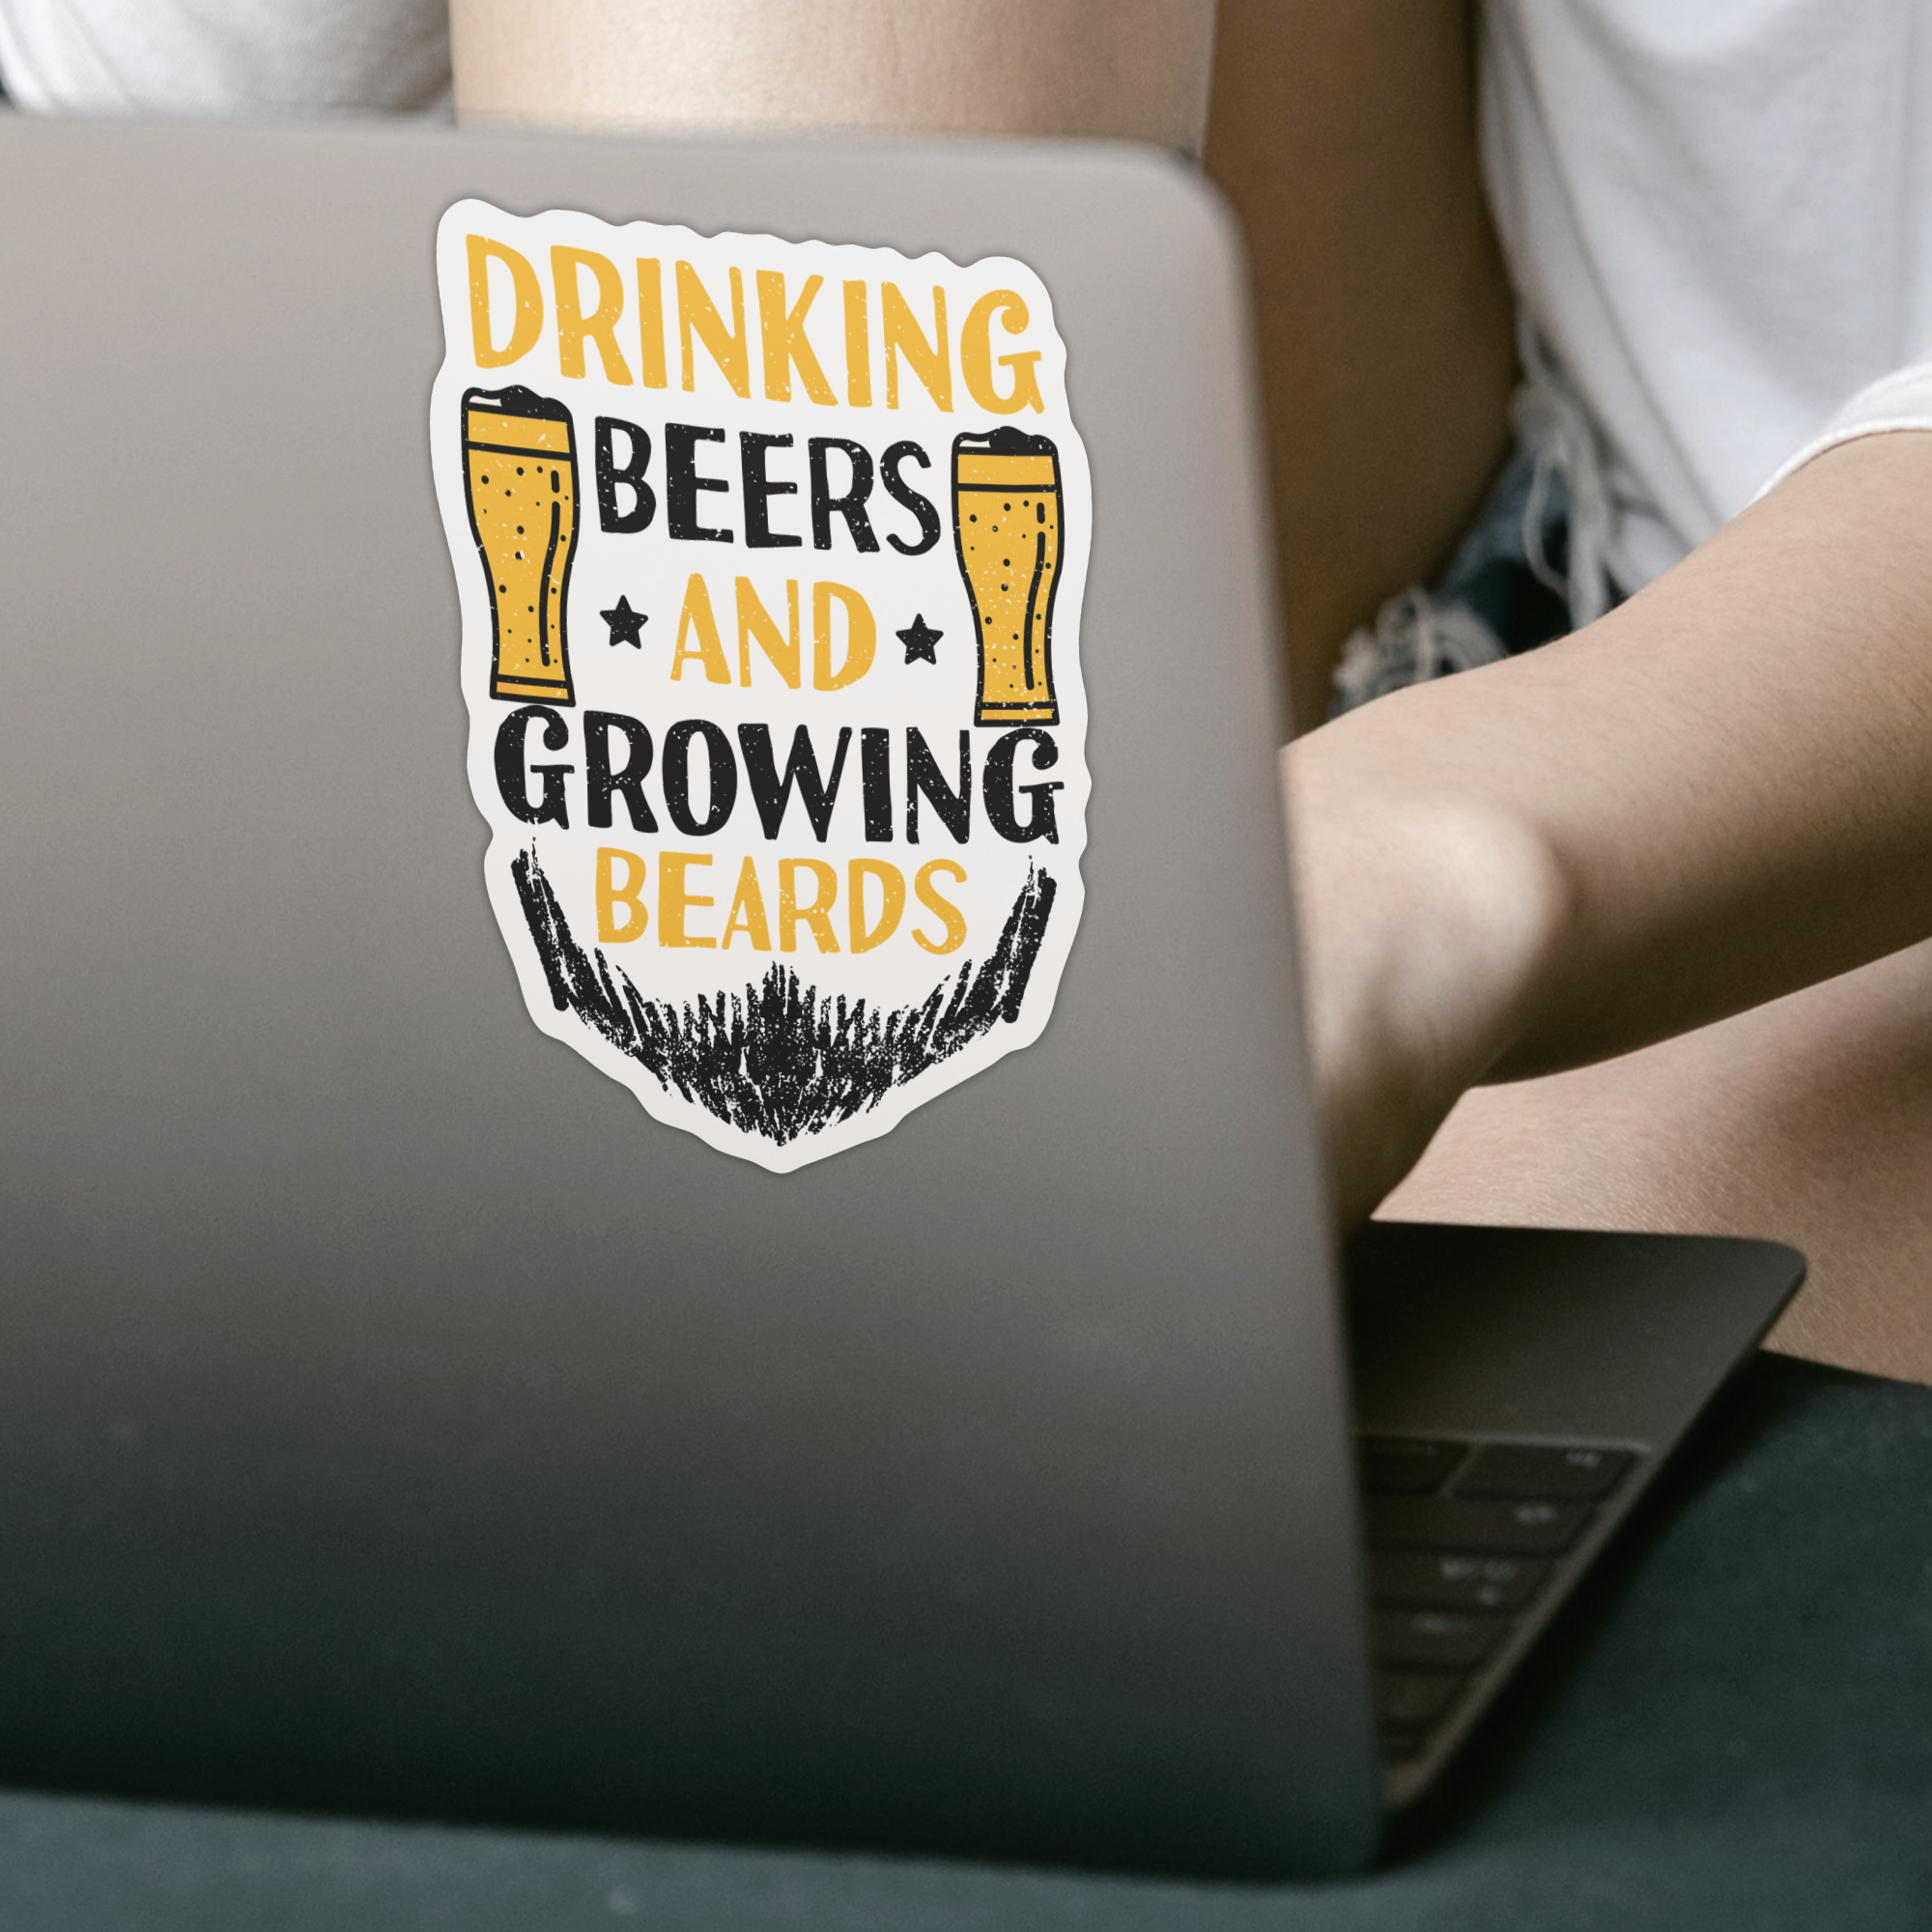 Drinking Beers And Growing Beards Sticker - DESIGNSBYJNK5.COM